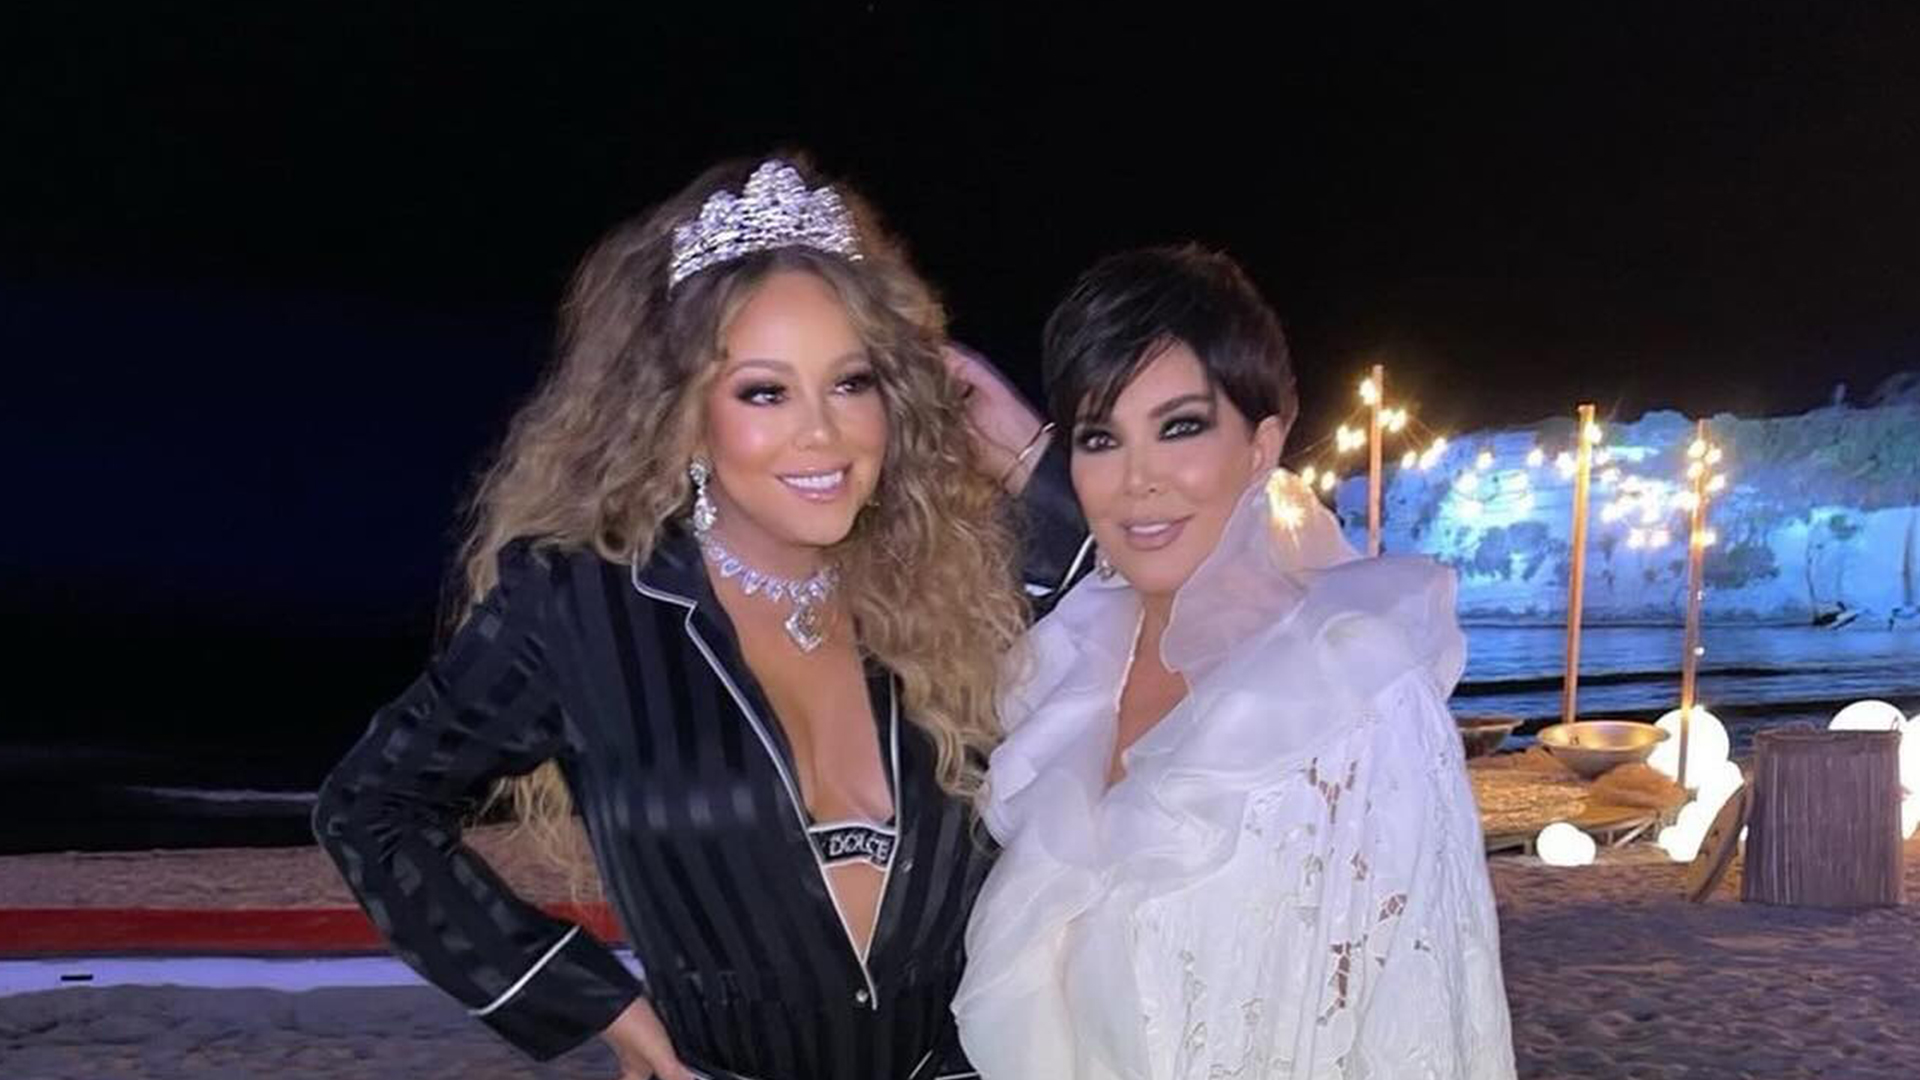 Kris Jenner’s Major Editing Fail with Mariah Carey Sparks Outrage from Kardashian Fans – No More Filters Allowed!